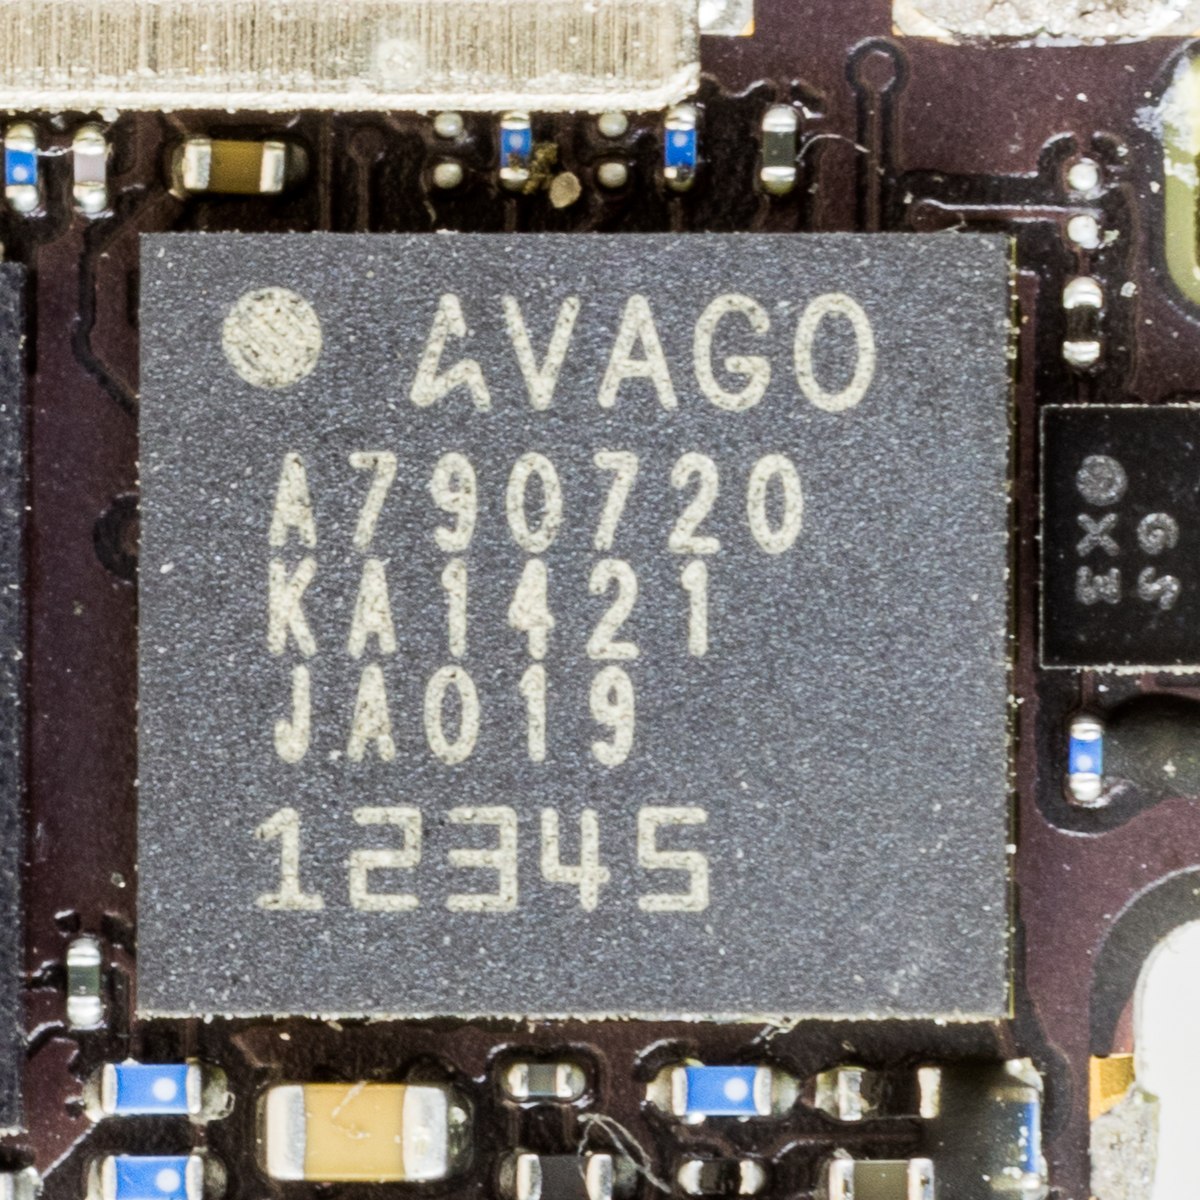 File:IPhone 5s (model A1457) - mainboard - Avago A790720-6702.jpg 